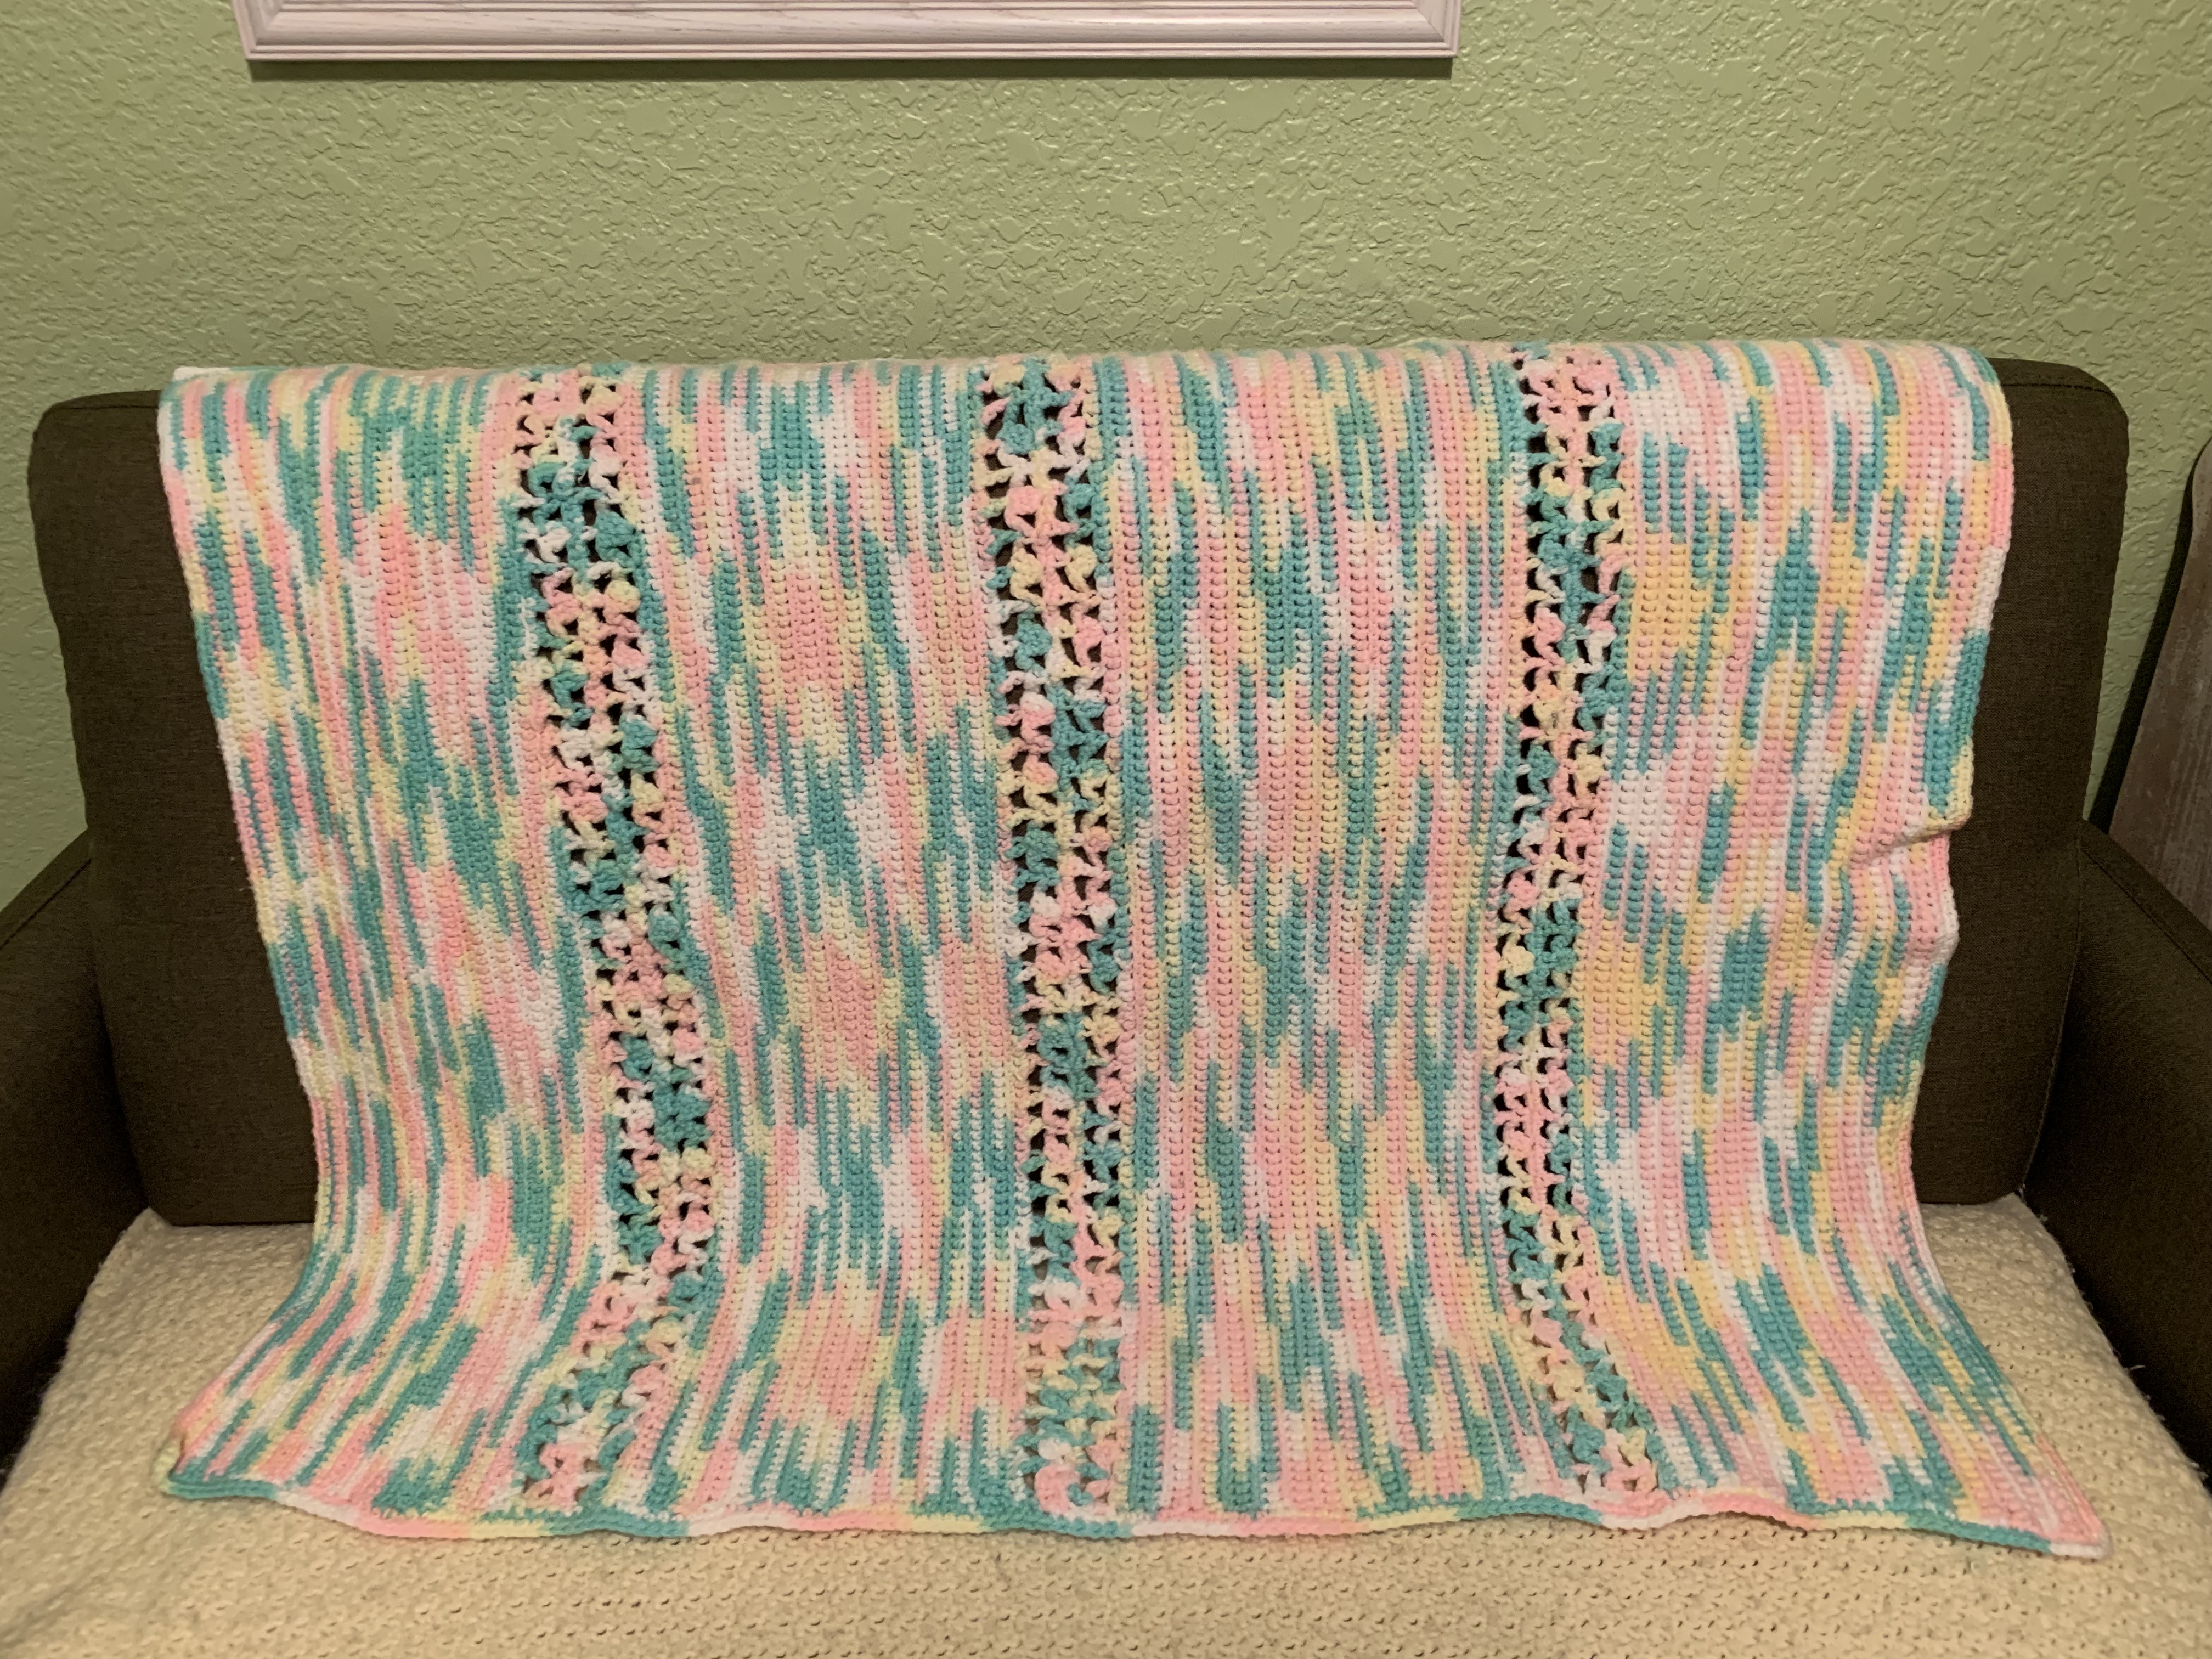 1984 Hand-Knit Rainbow Colors (pink, green, yellow, white) Afghan Crib Blanket (28.5\